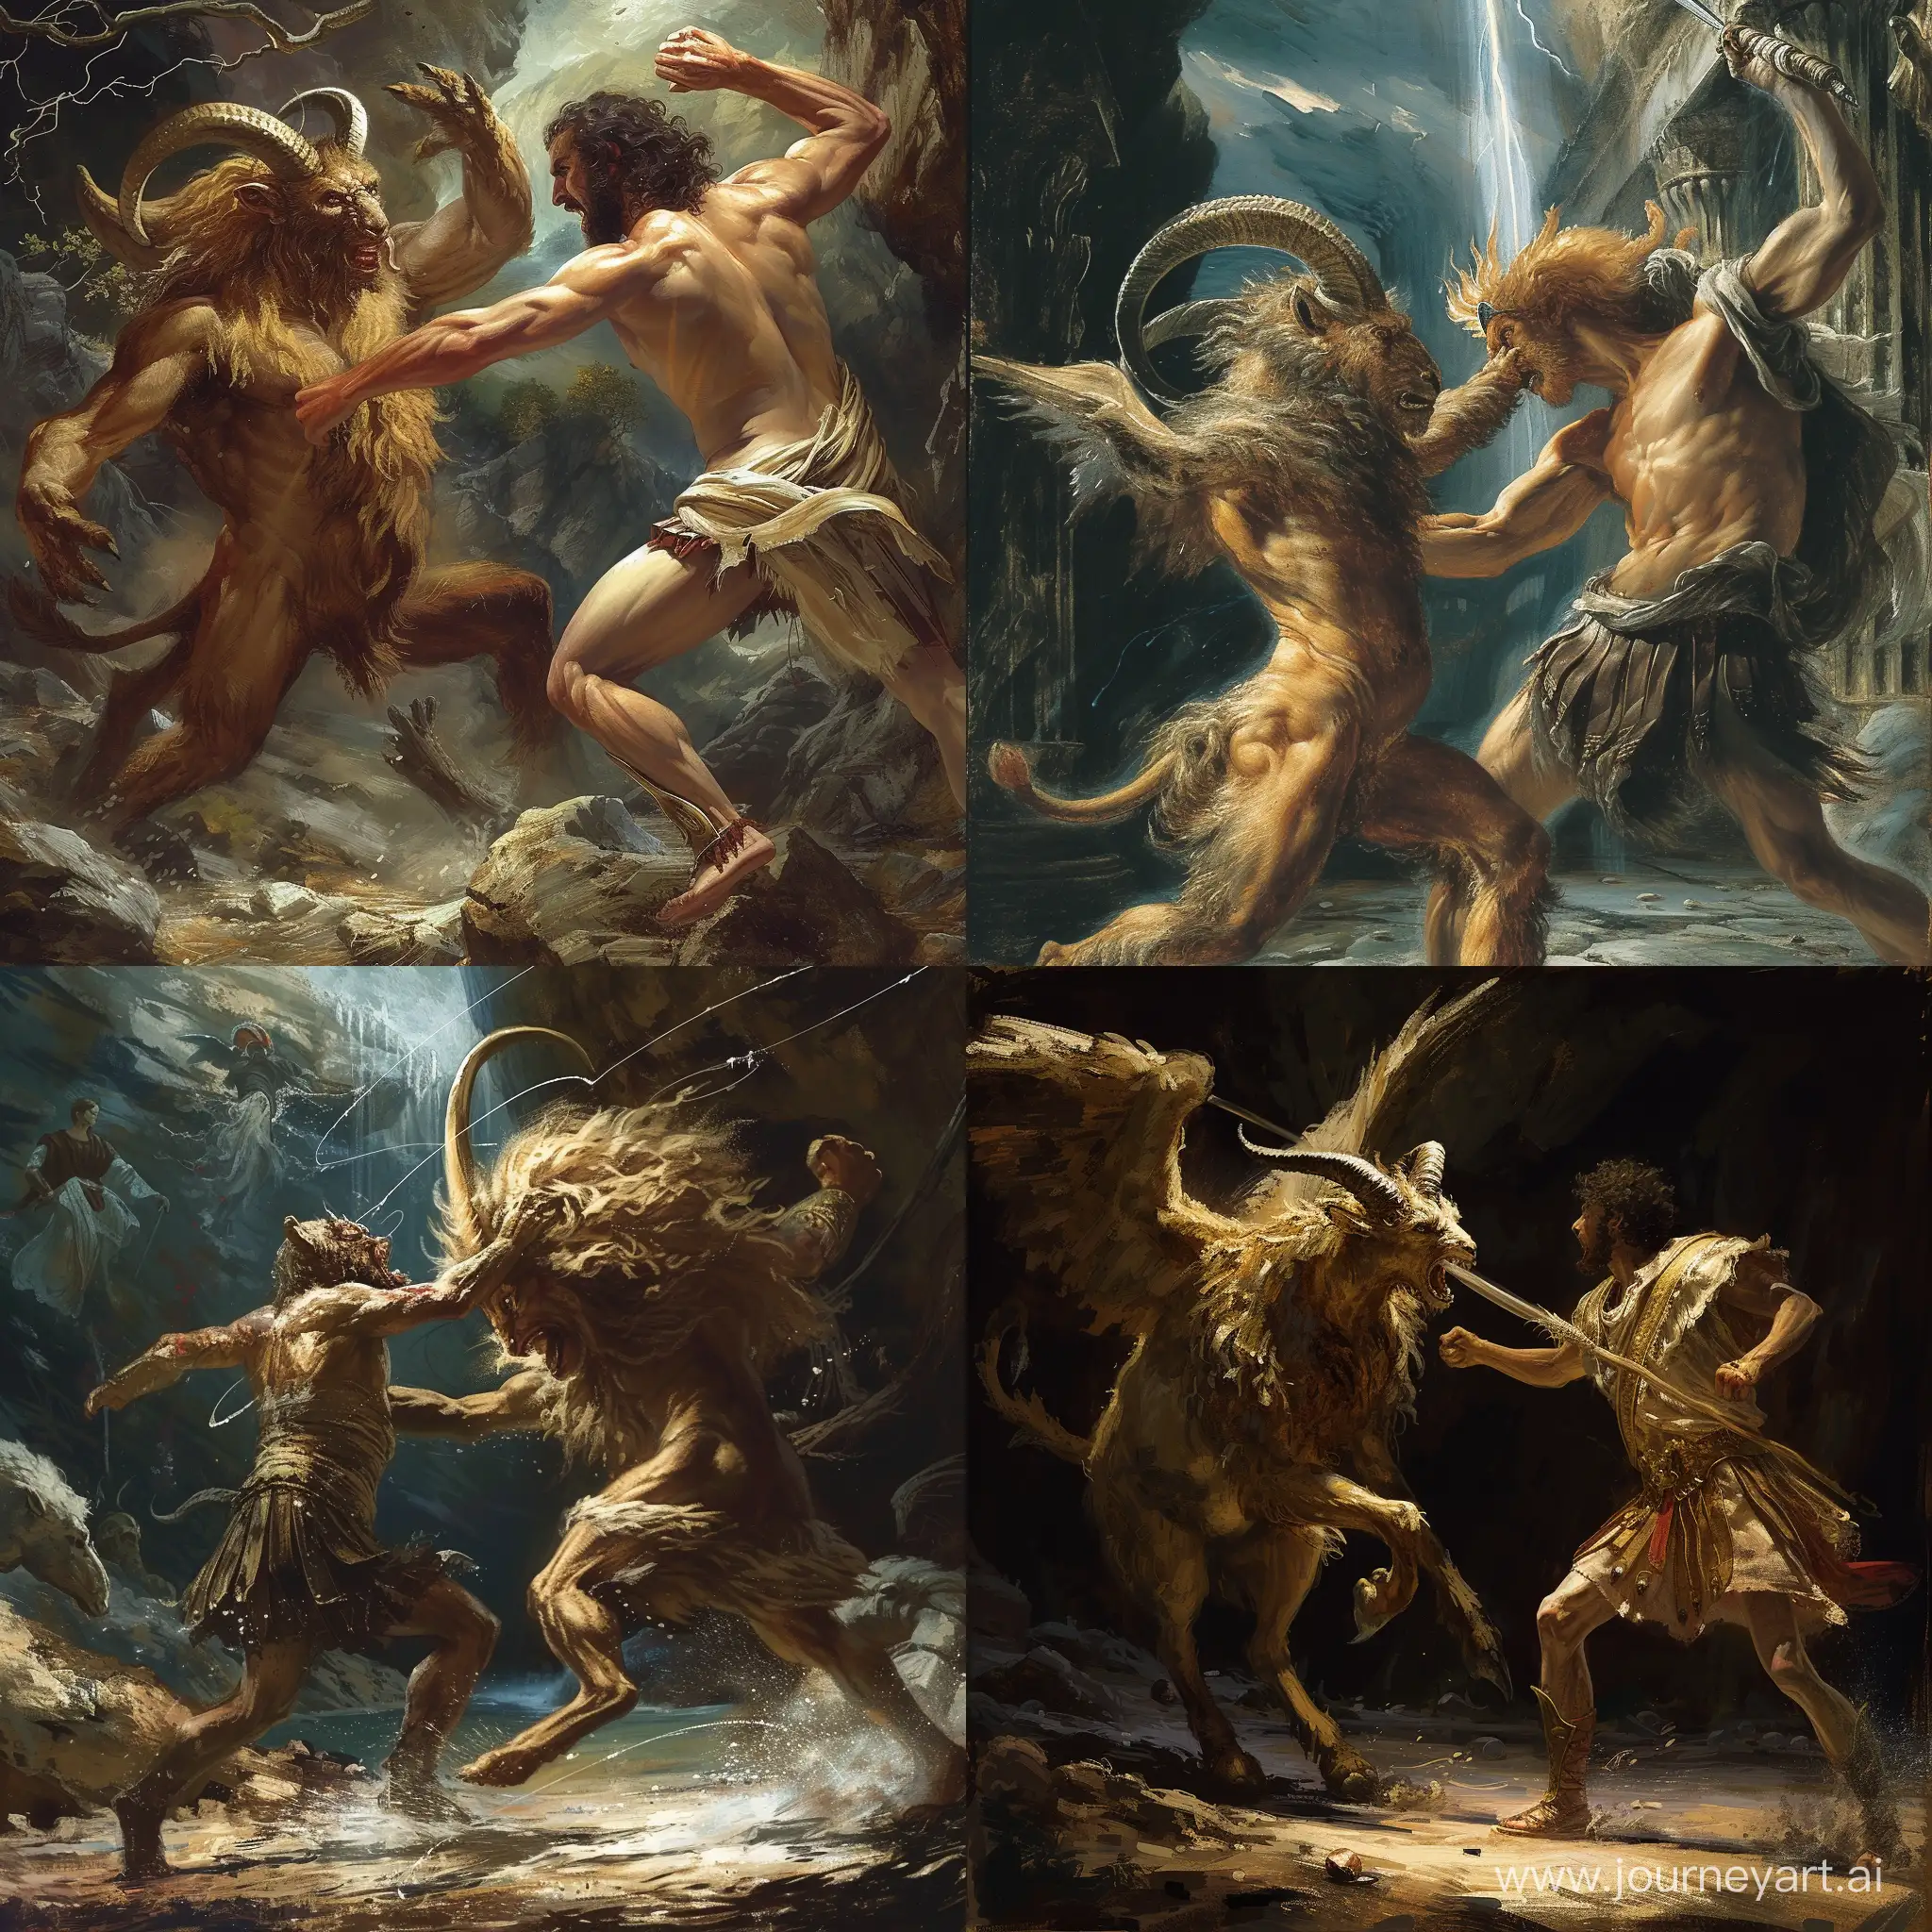 a mythological creature that is a hybrid of a goat and a lion that is fighting apollo the Olympian deity, the fight is taking place in a rather dark place